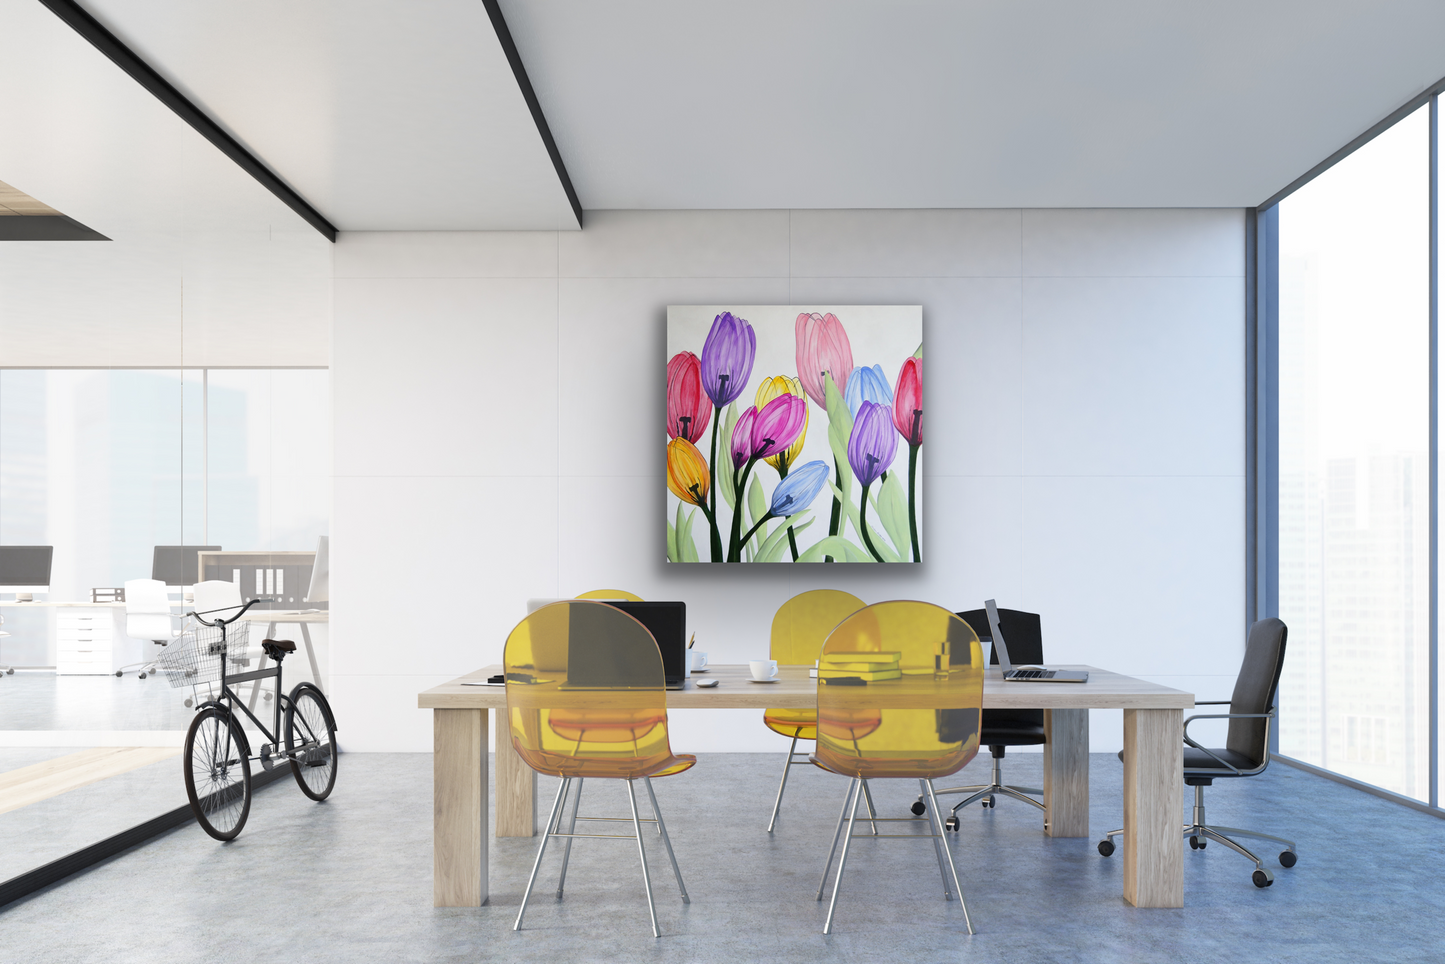 "Frolic" art of work will look great in an office professional space.